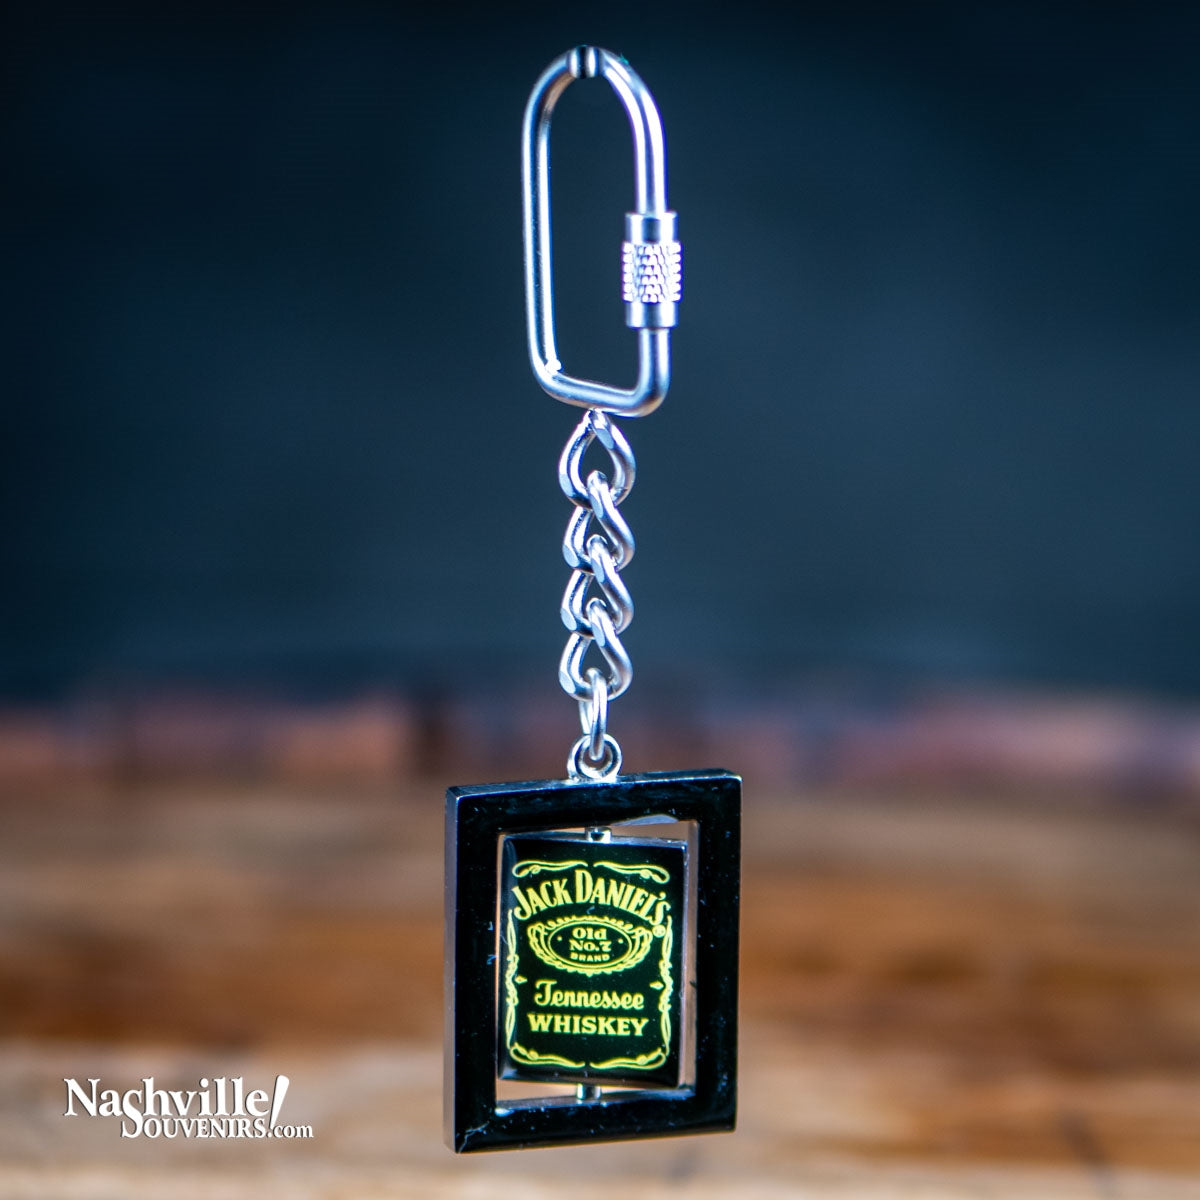 Let Jack Daniel's help you locate your keys with this great vintage Jack Daniel's keychain. Made of heavy metal and is approximately 4 3/4" long and features the JD bottle label logo.